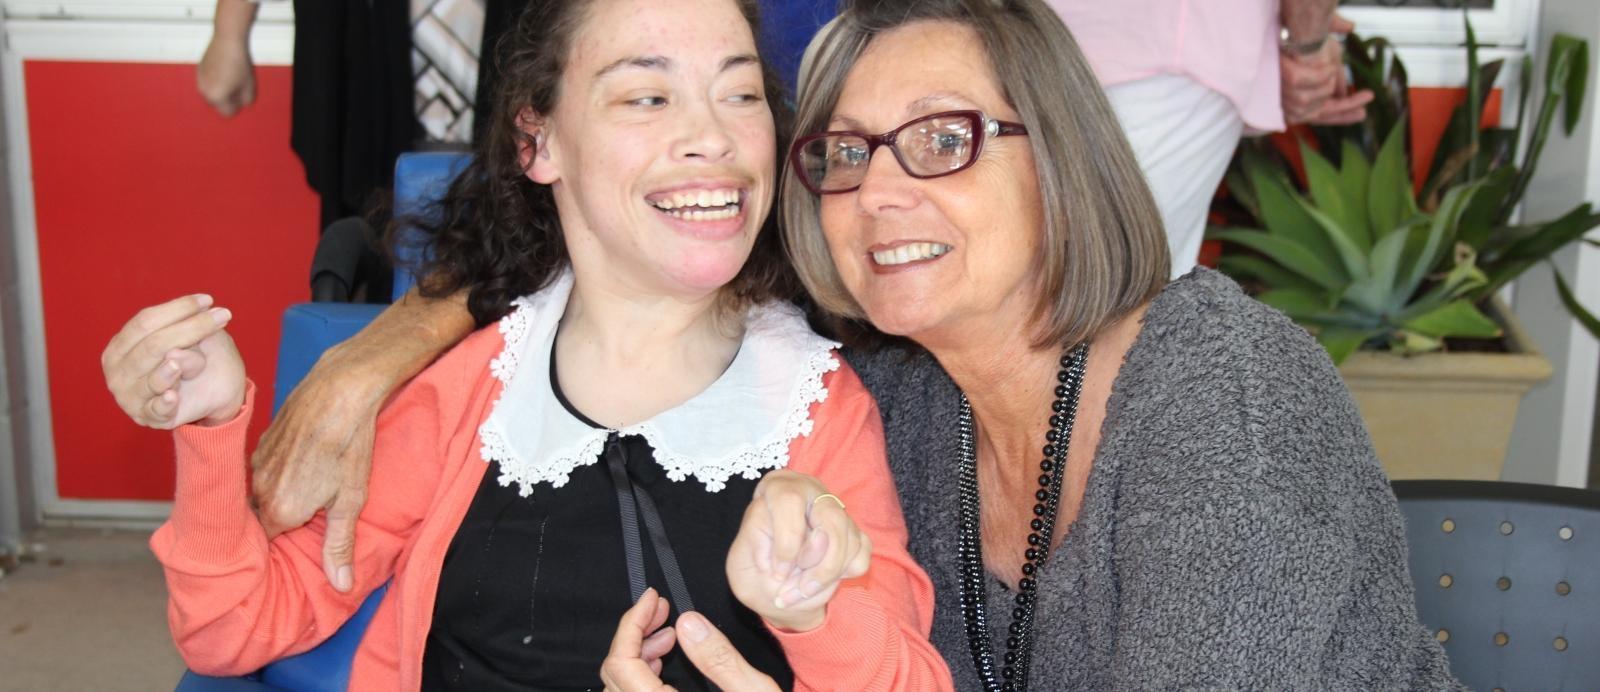 Mother and daughter, Larissa and Kathy smile having received NDIS support through CPL